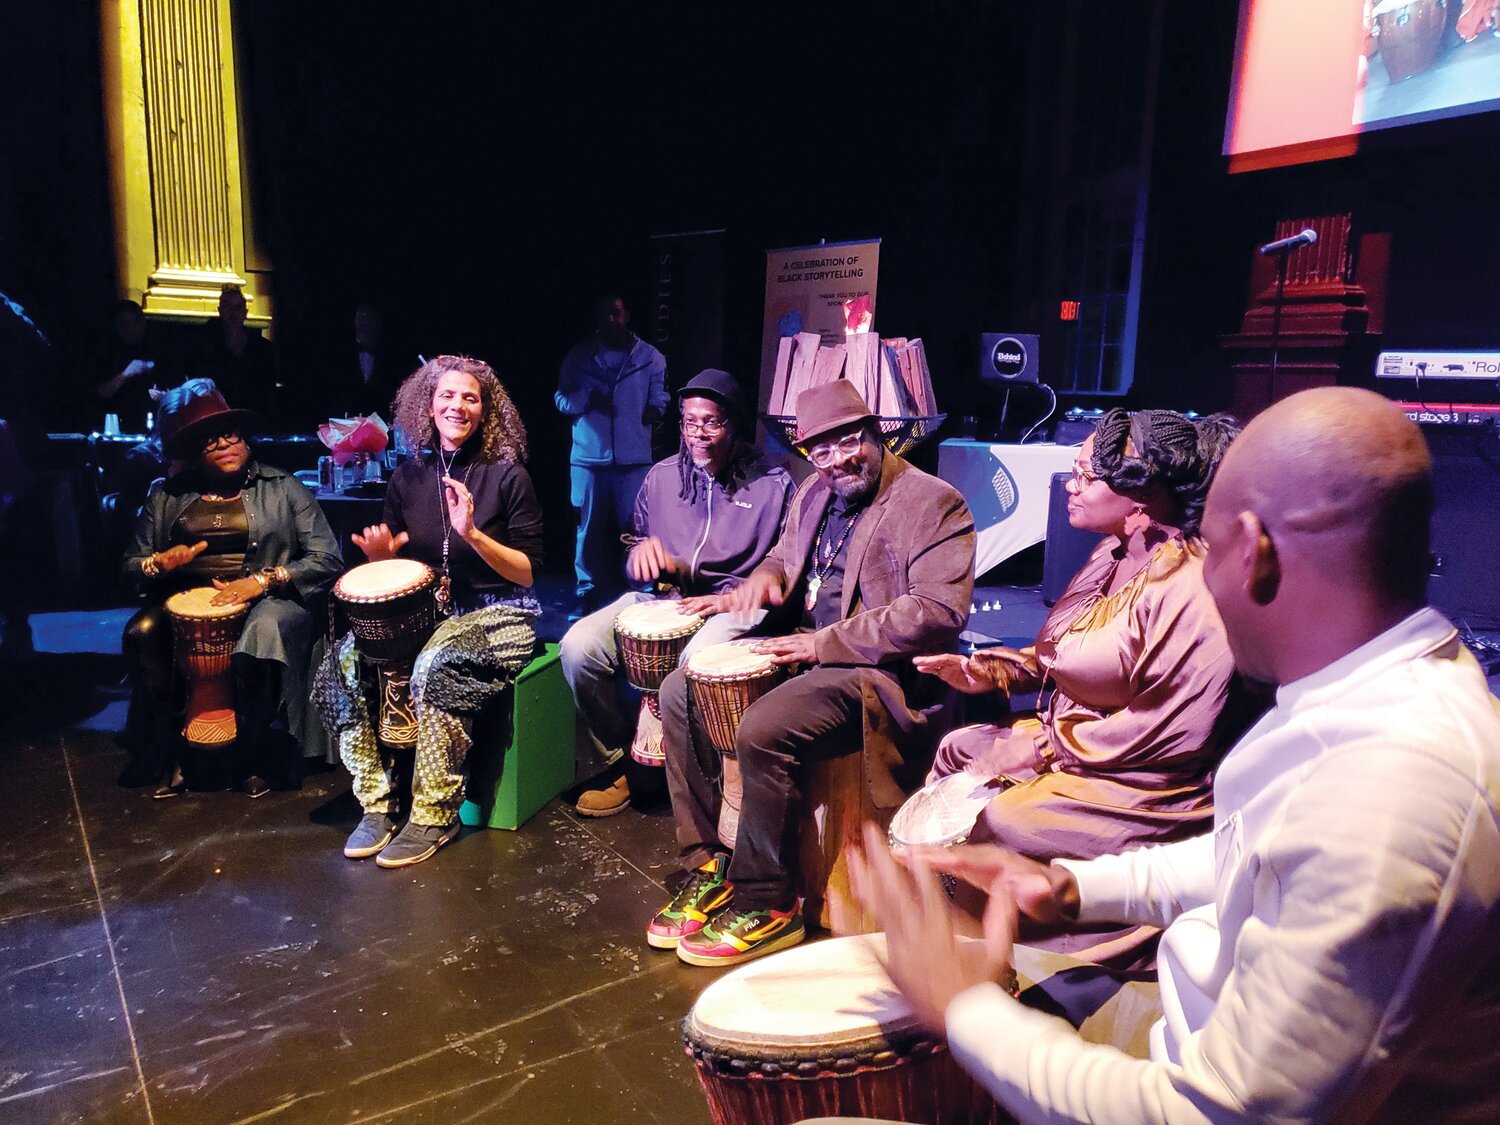 DJEMBEFOLA: Djembe player Sidy Maïga (right) leads a drum circle at the Funda Fest 26 opening party at Rites and Reason Theatre with (right to left) Rachel Briggs, Marlon Carey, Len Cabral, Valerie Tutson, and Shavon ChocIt Smith.